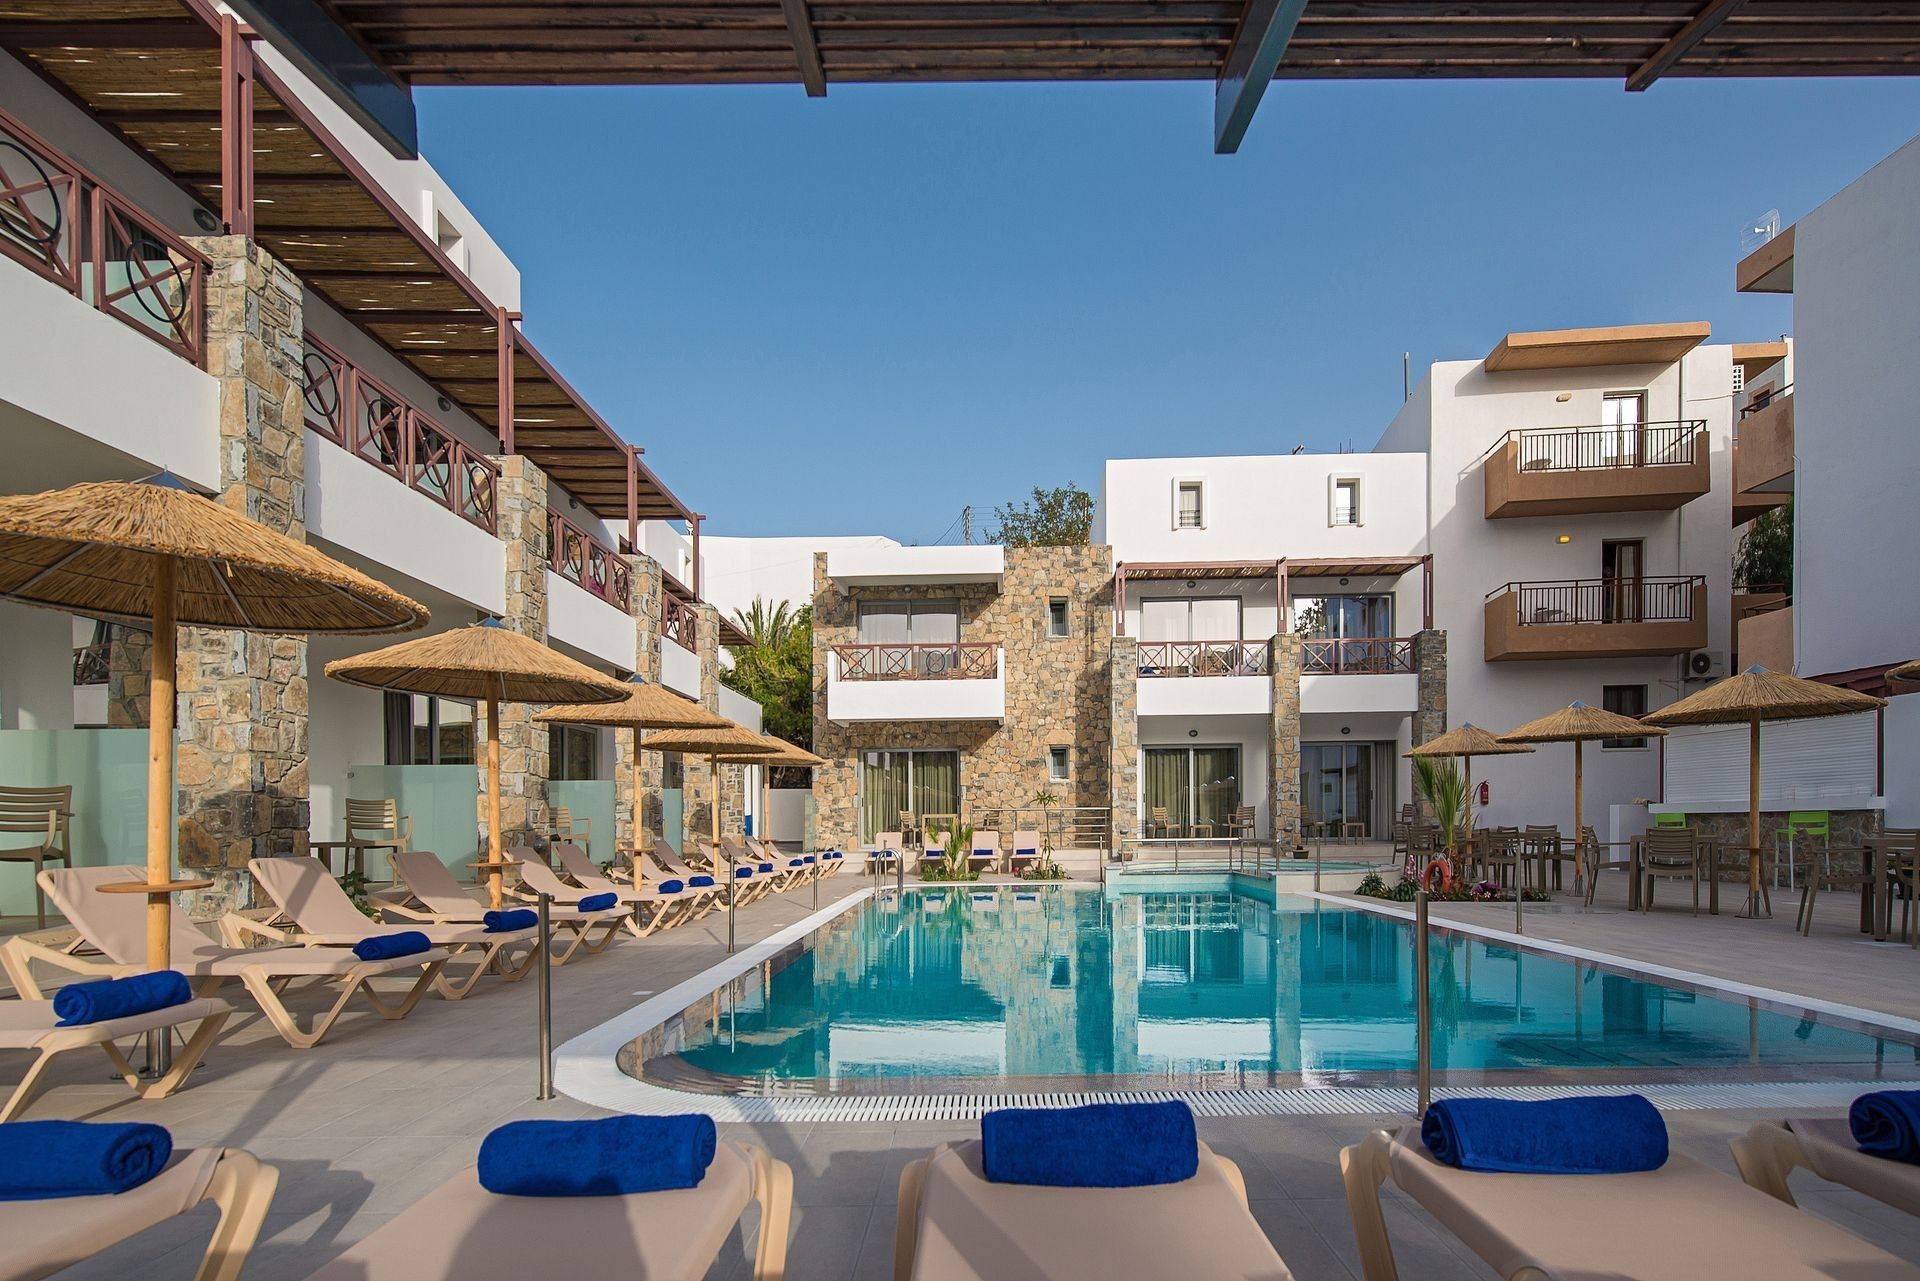 mager fjols underviser Family Hotel in Crete, Ierapertra | South Coast Hotel & Apartments